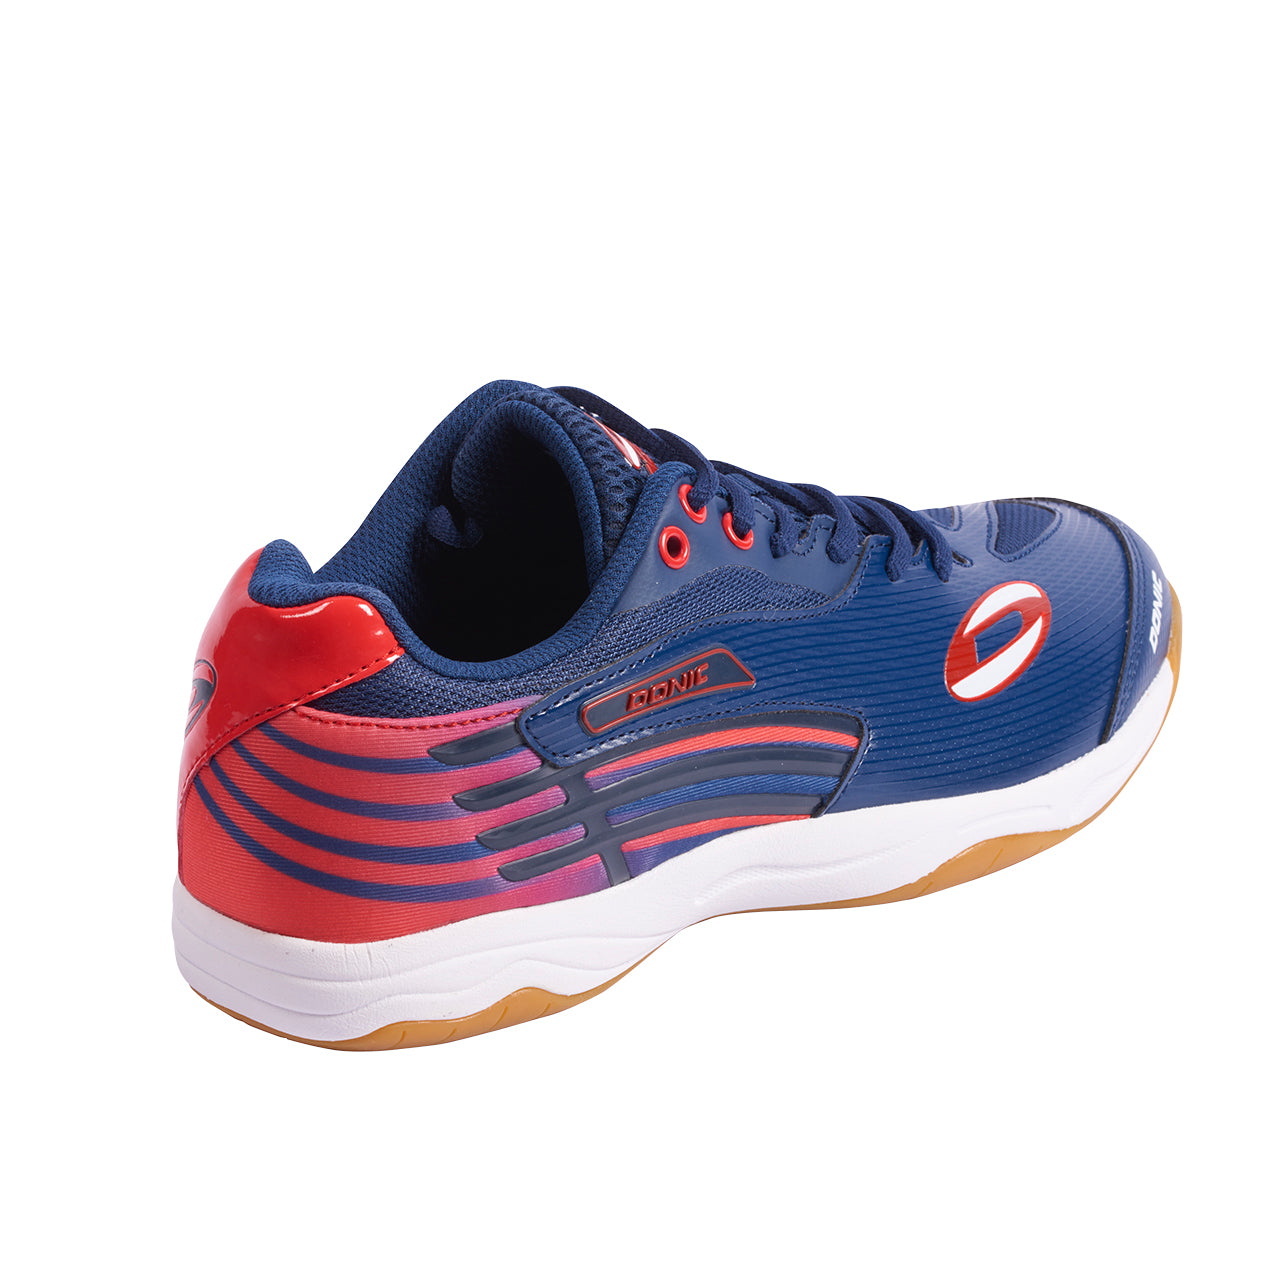 Donic Spaceflex Shoes - Navy